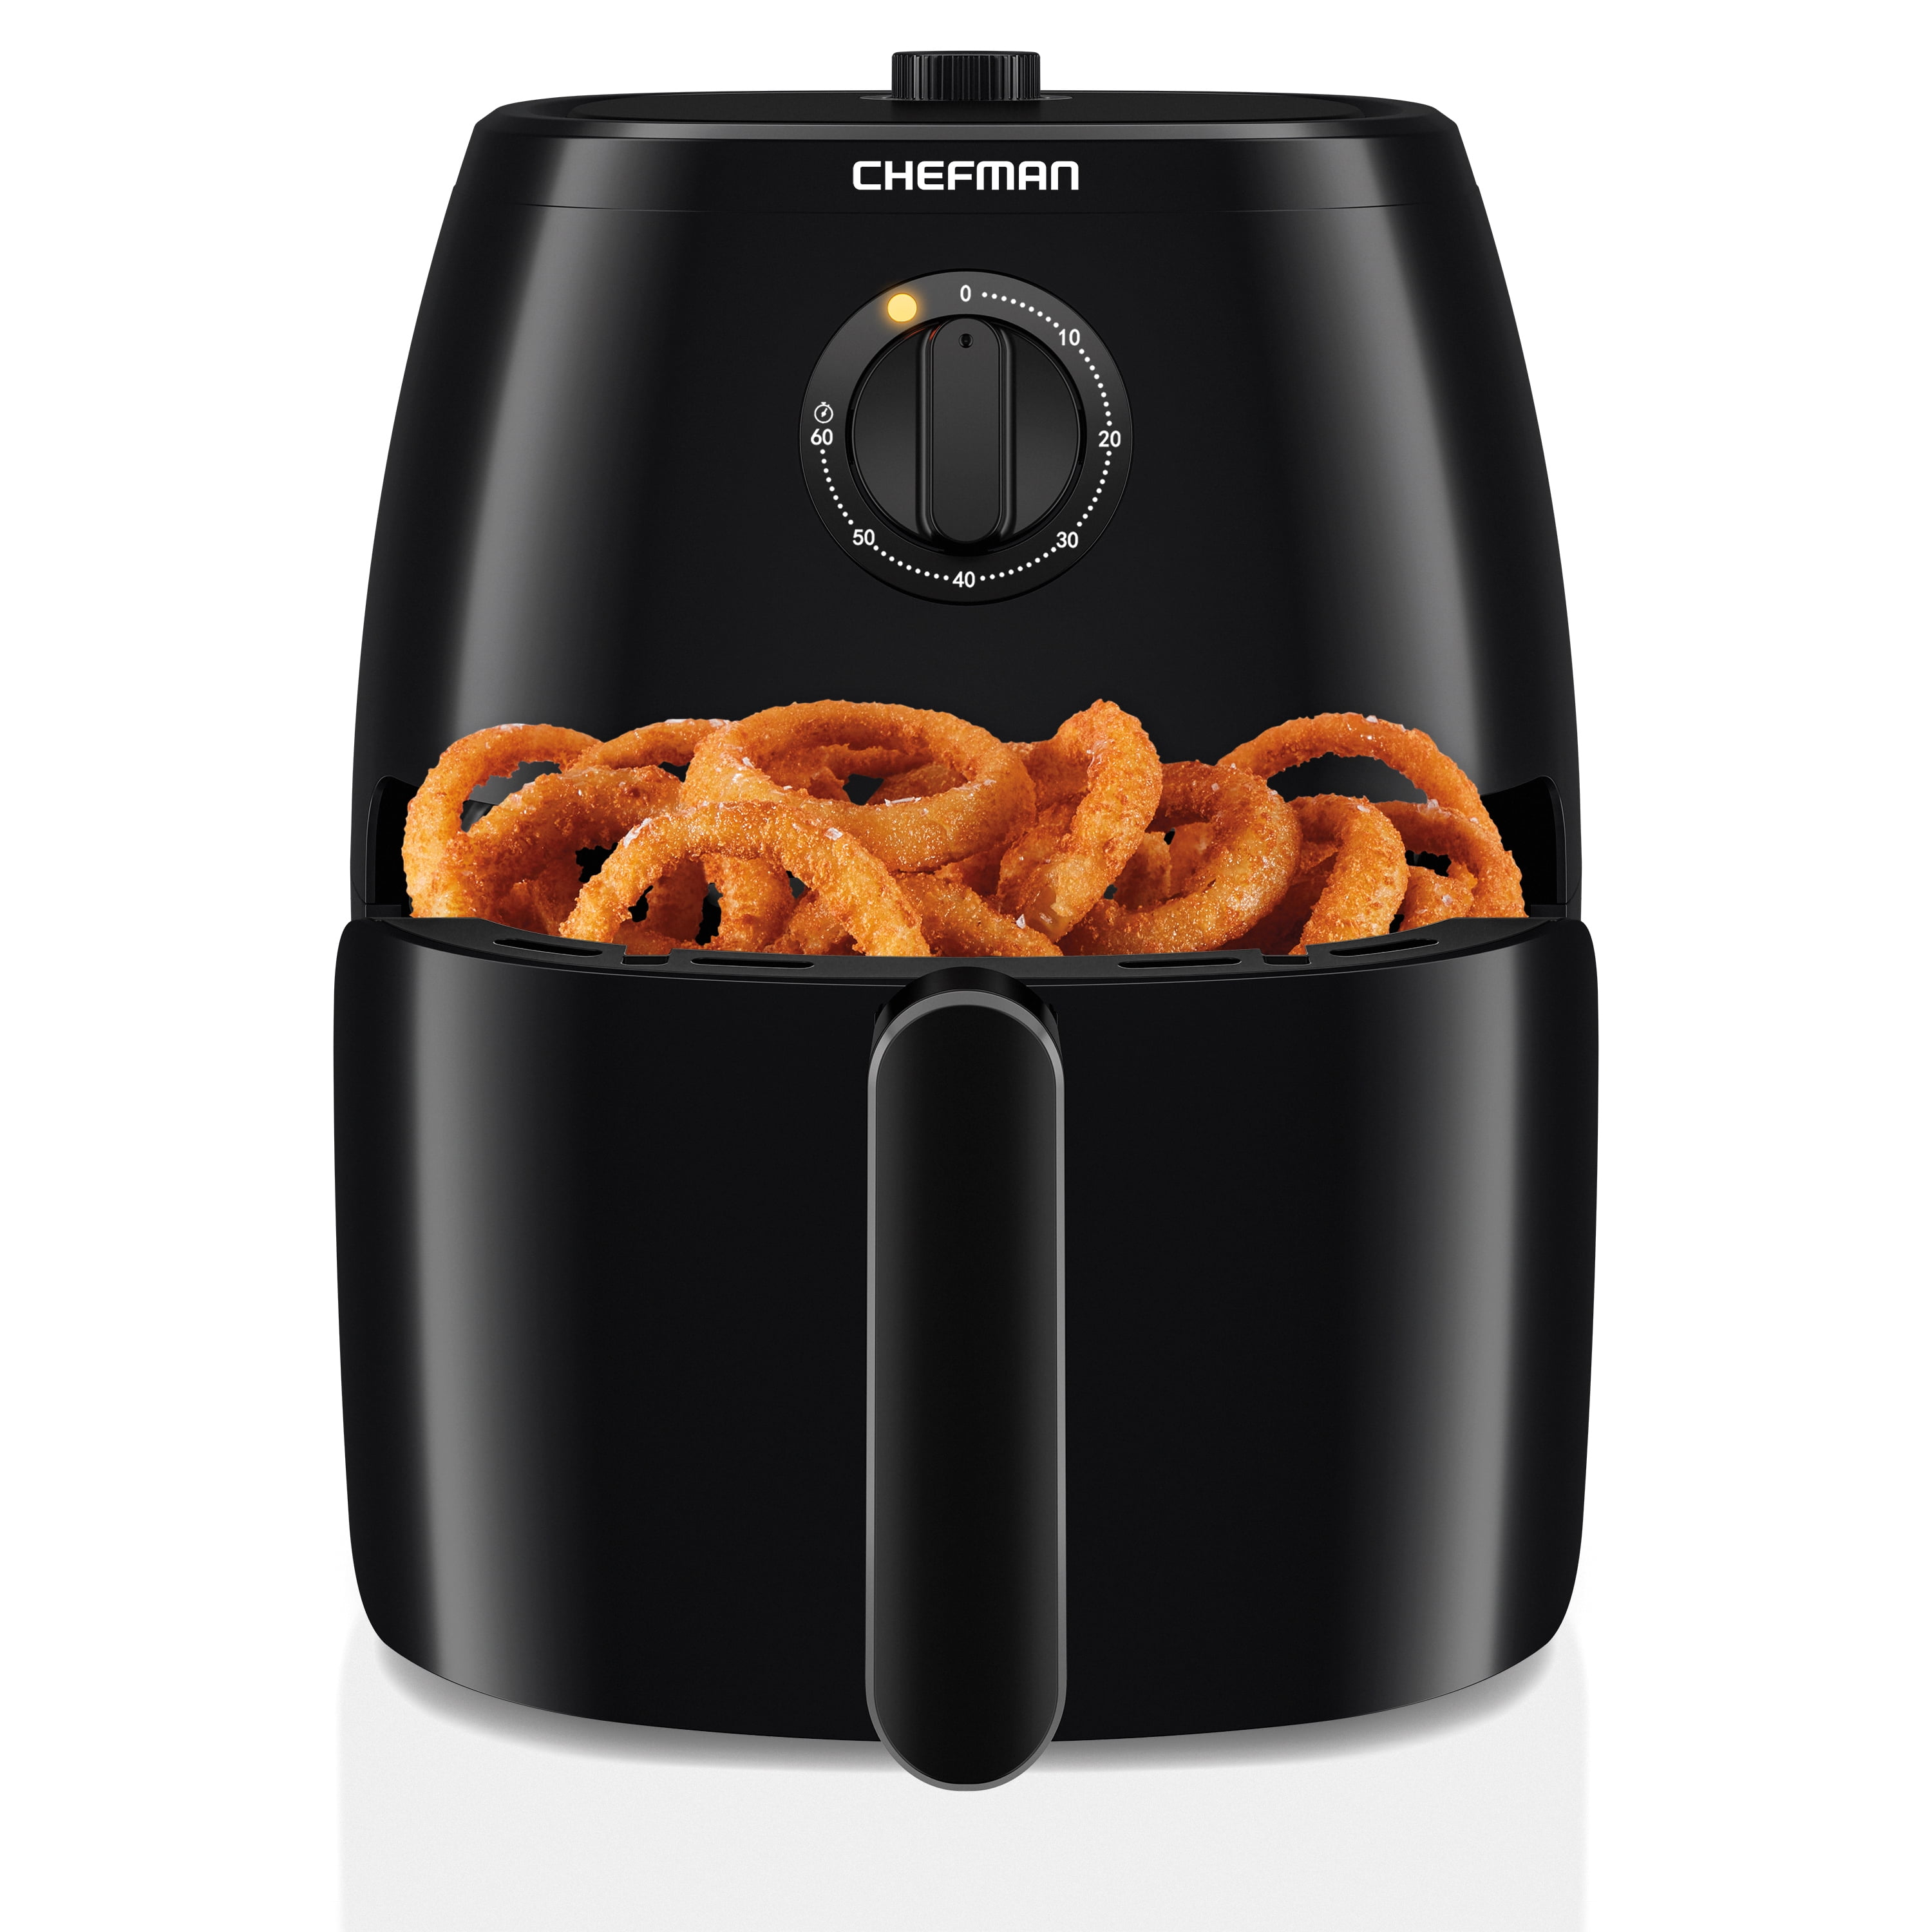 Chefman TurboFry 2-Quart Air Fryer, Dishwasher Safe Basket & Tray, Use  Little to No Oil For Healthy Food, 60 Minute Timer, Fry Healthier Meals  Fast